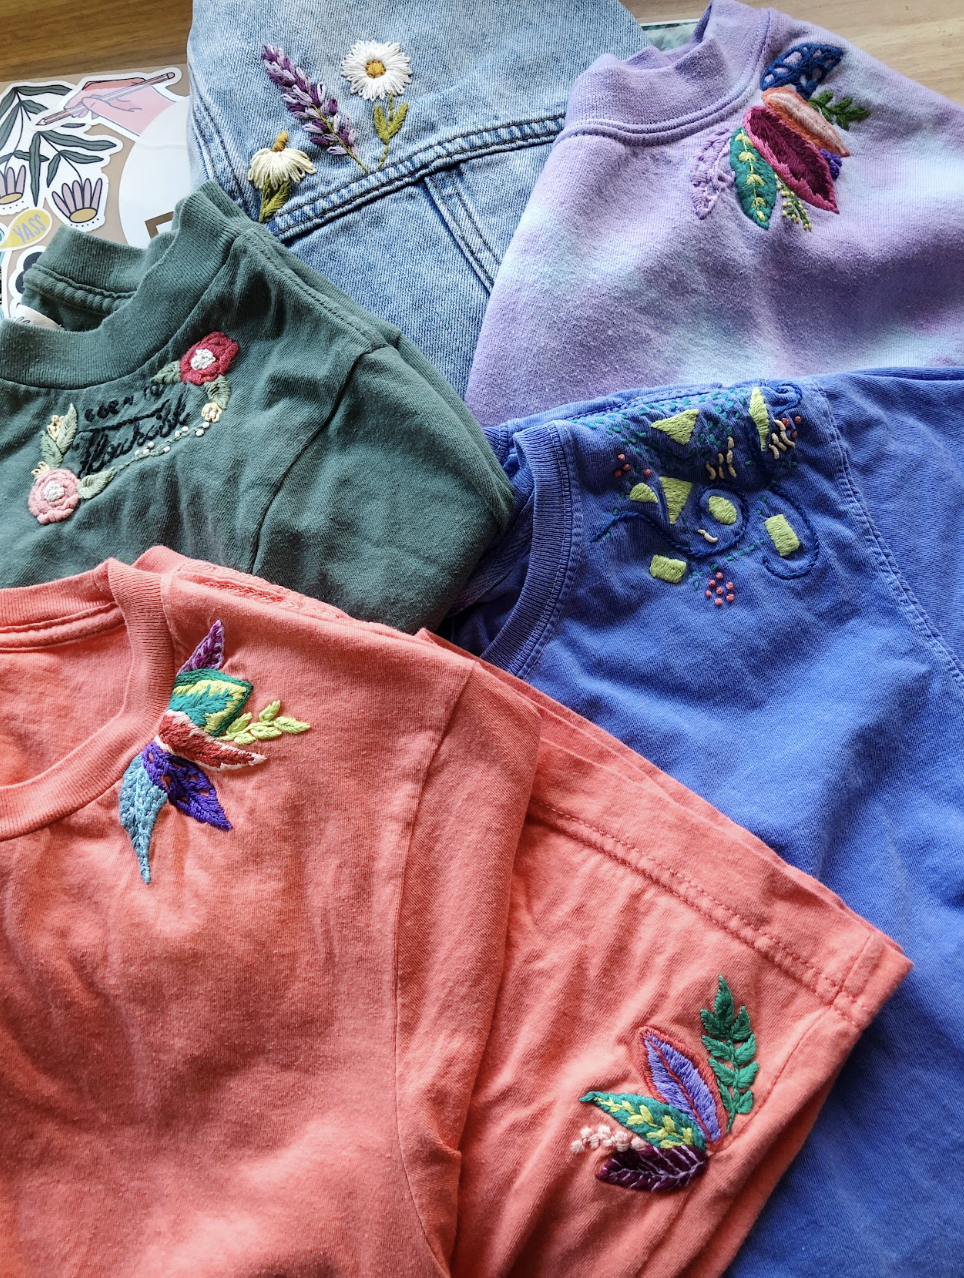 EMBROIDERY CLASS: Upcycle Your Clothing with Hand Embroidery